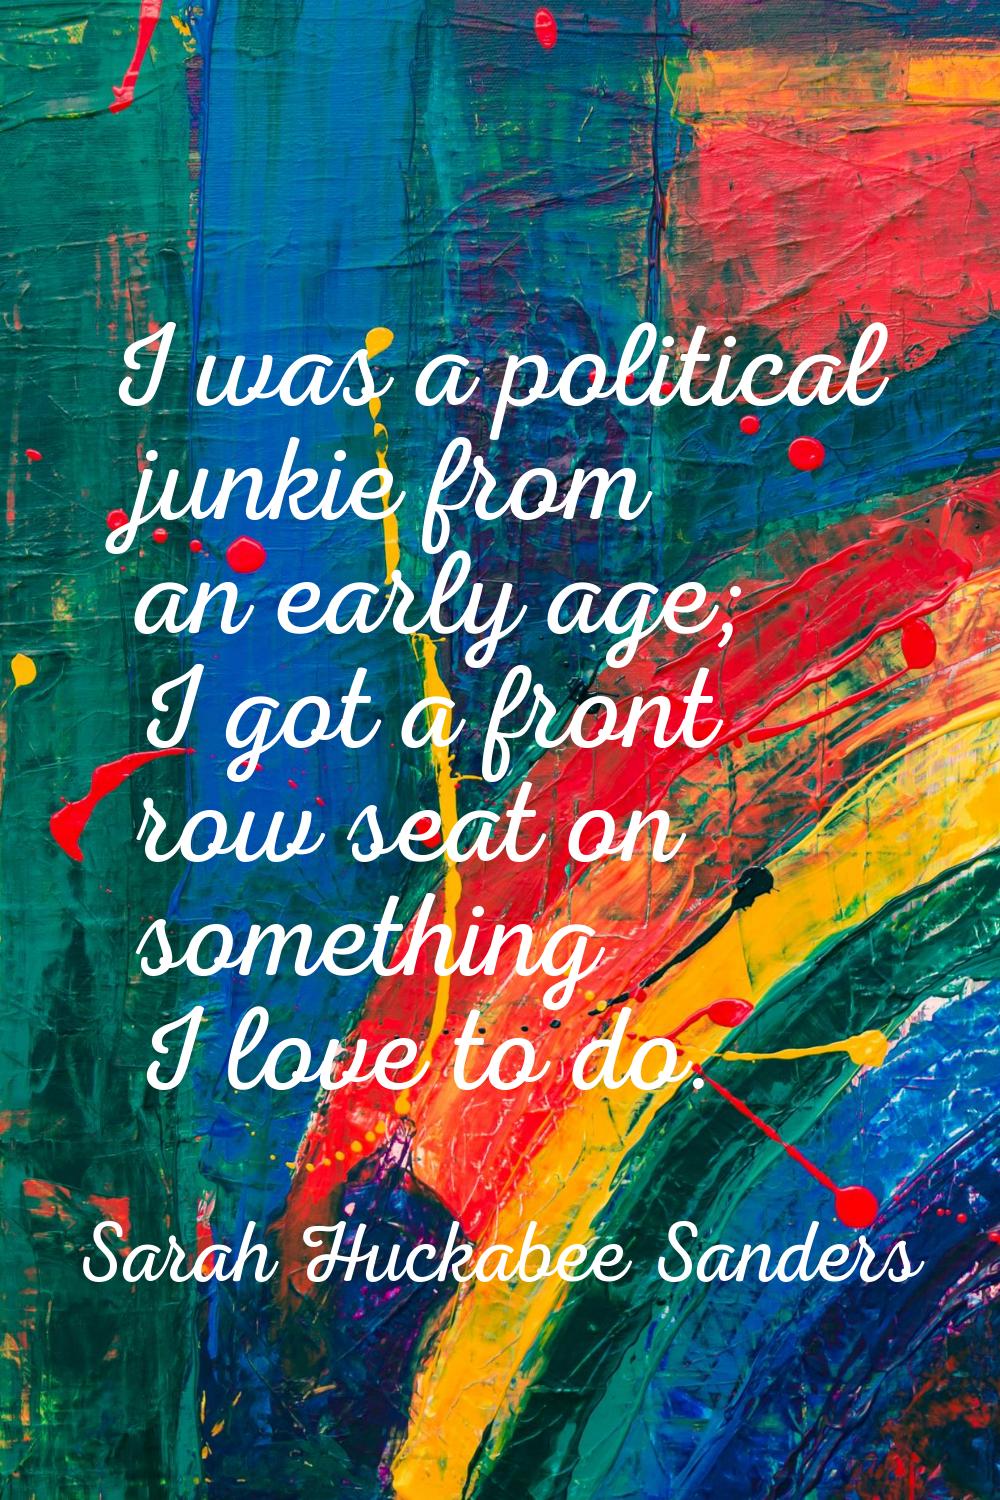 I was a political junkie from an early age; I got a front row seat on something I love to do.